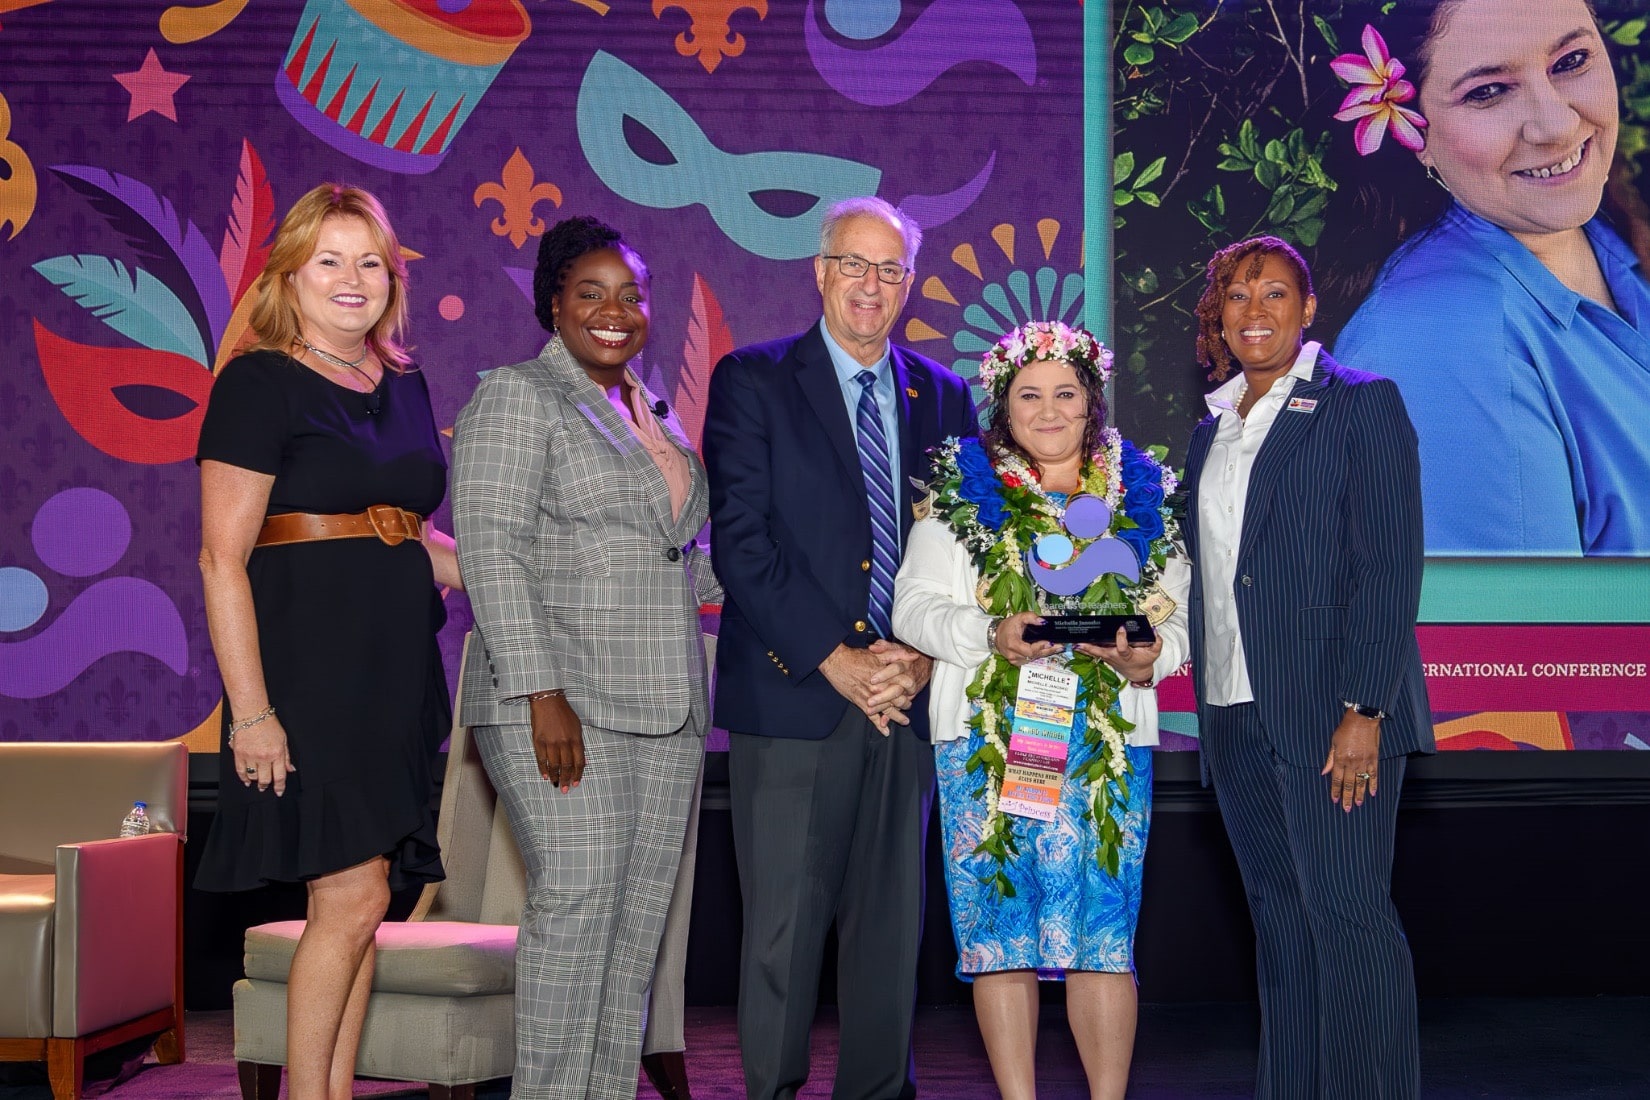 Michelle Janosko (second from right) receives her Parent Educator of the Year Award at the Parents as Teachers 2023 International Conference in New Orleans. From left are Parents as Teachers Board Members Suzy Gibson, Dr. Jamie Singleton, Board Chair Dr. Mark Ginsberg and President/CEO Constance Gully.